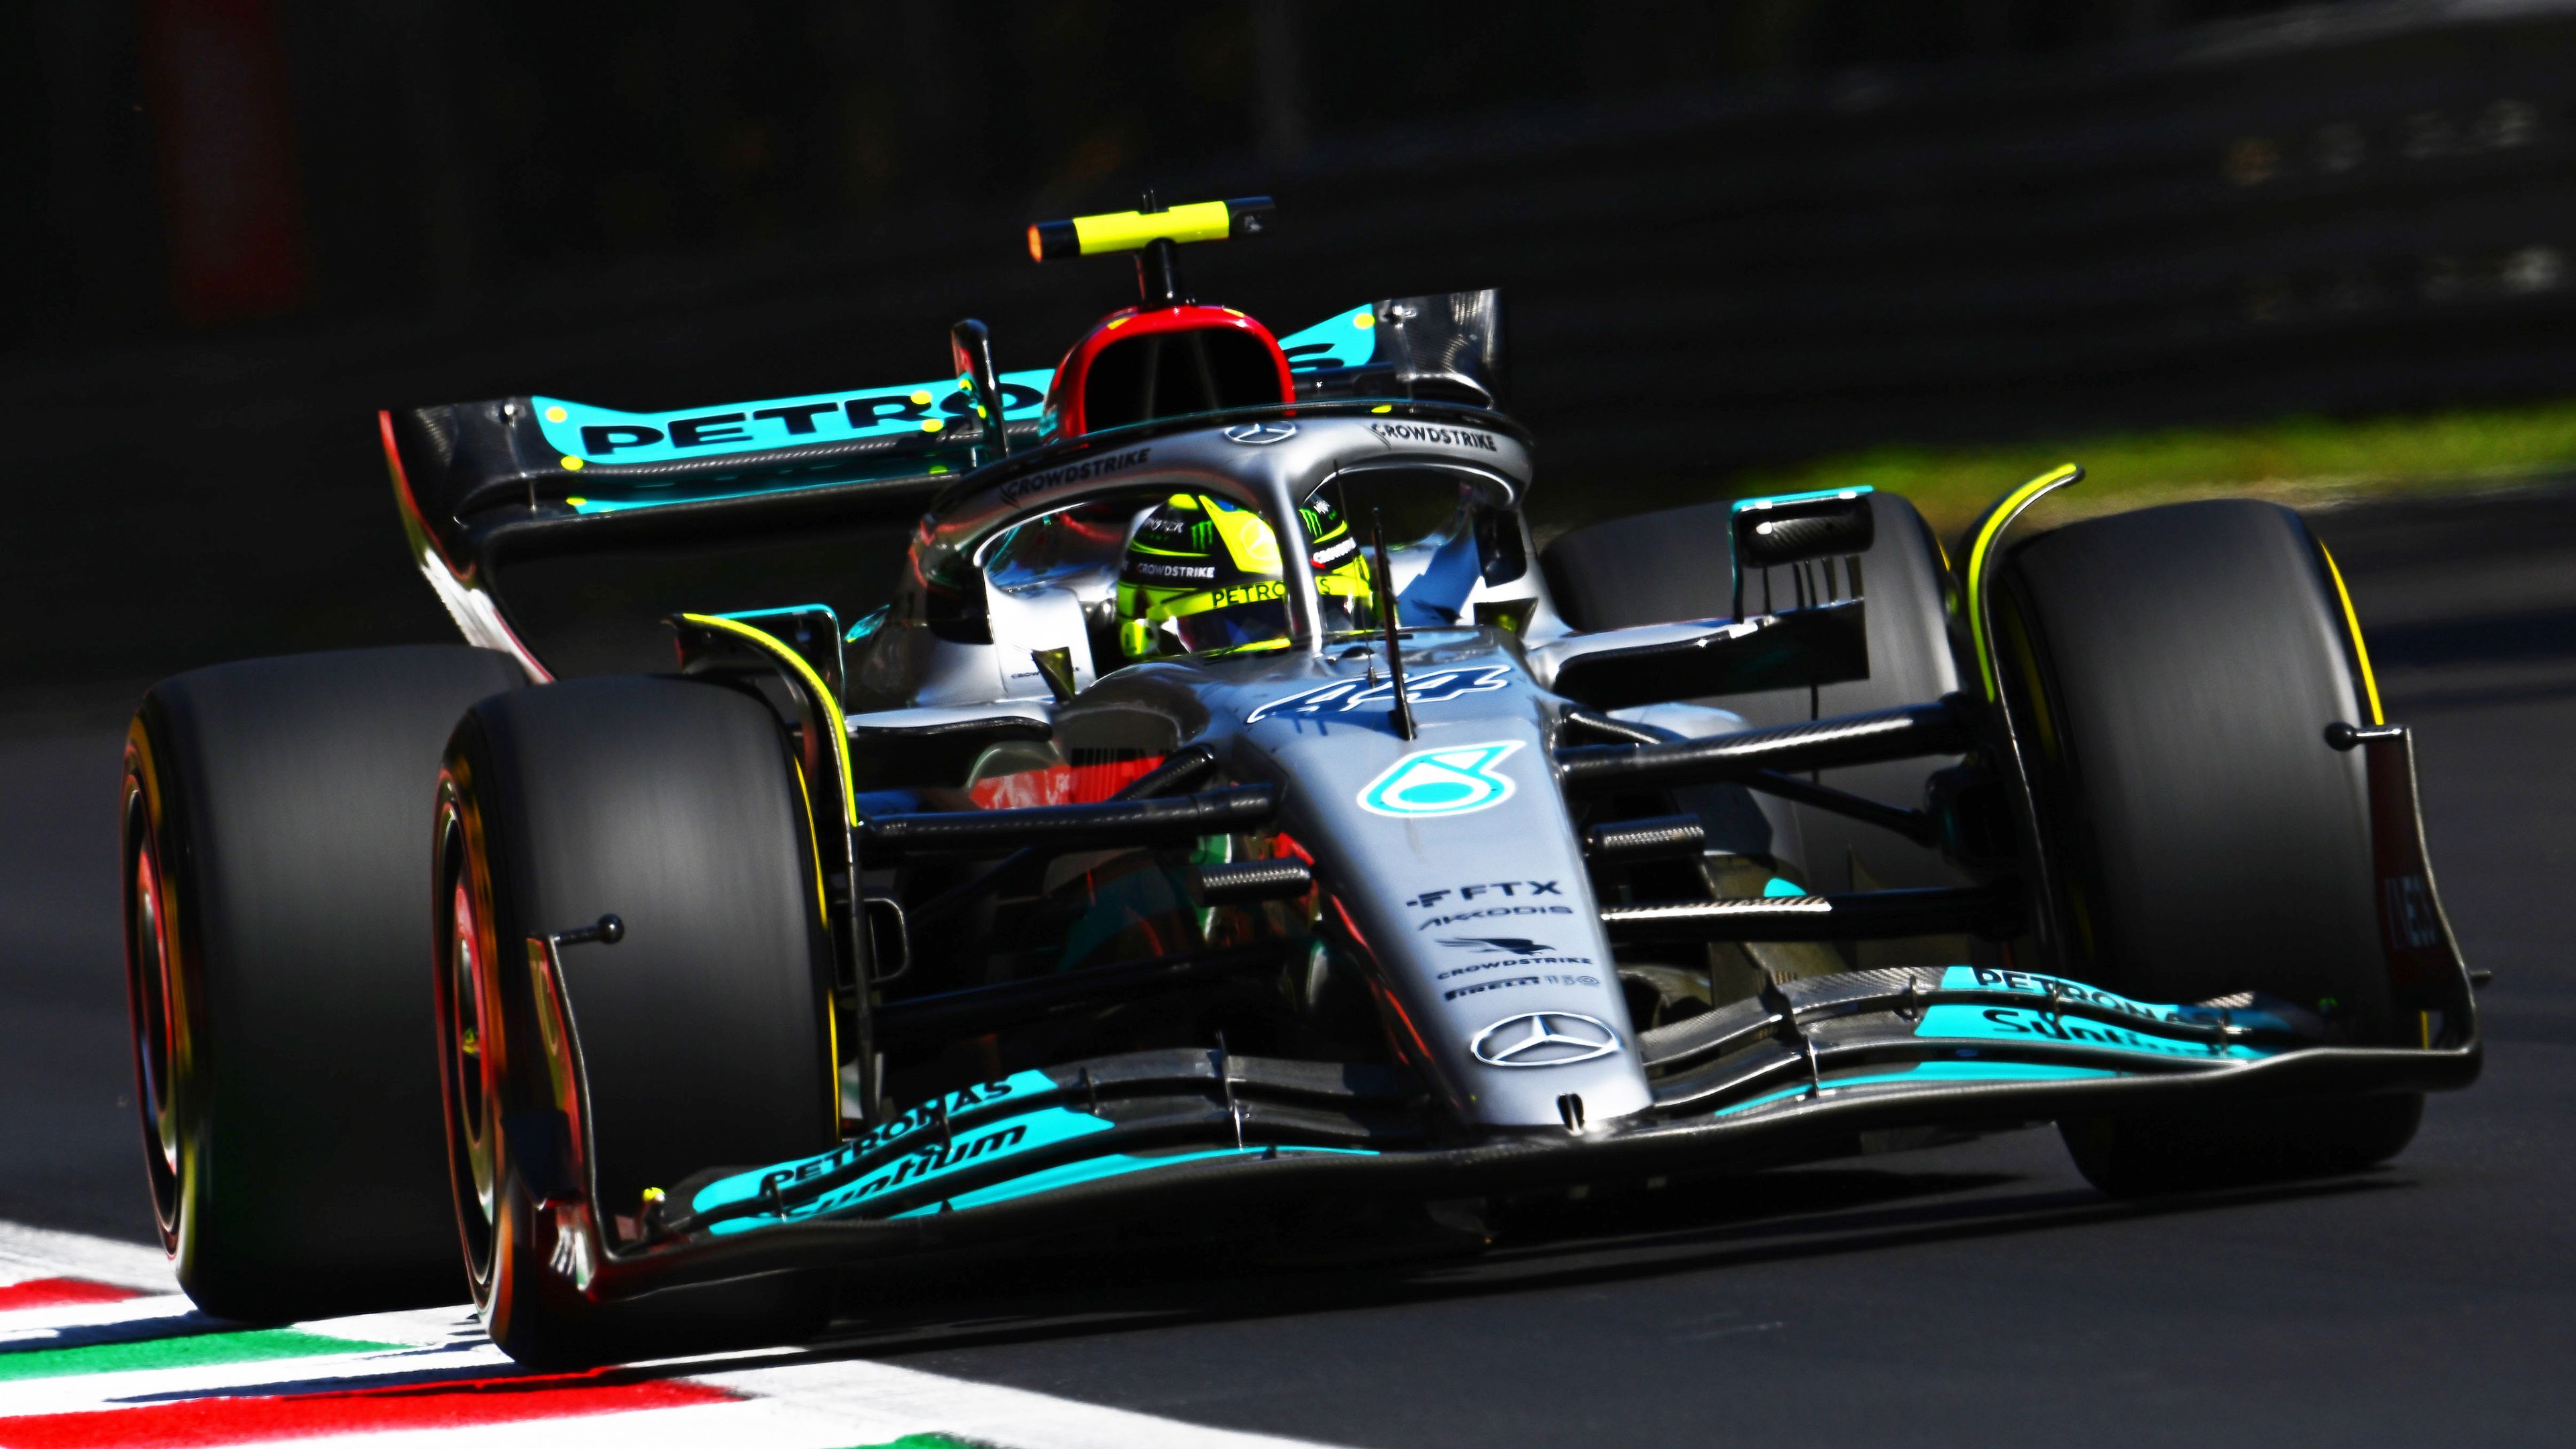 Safety car finish at the Italian Grand Prix revives bad memories for Lewis Hamilton